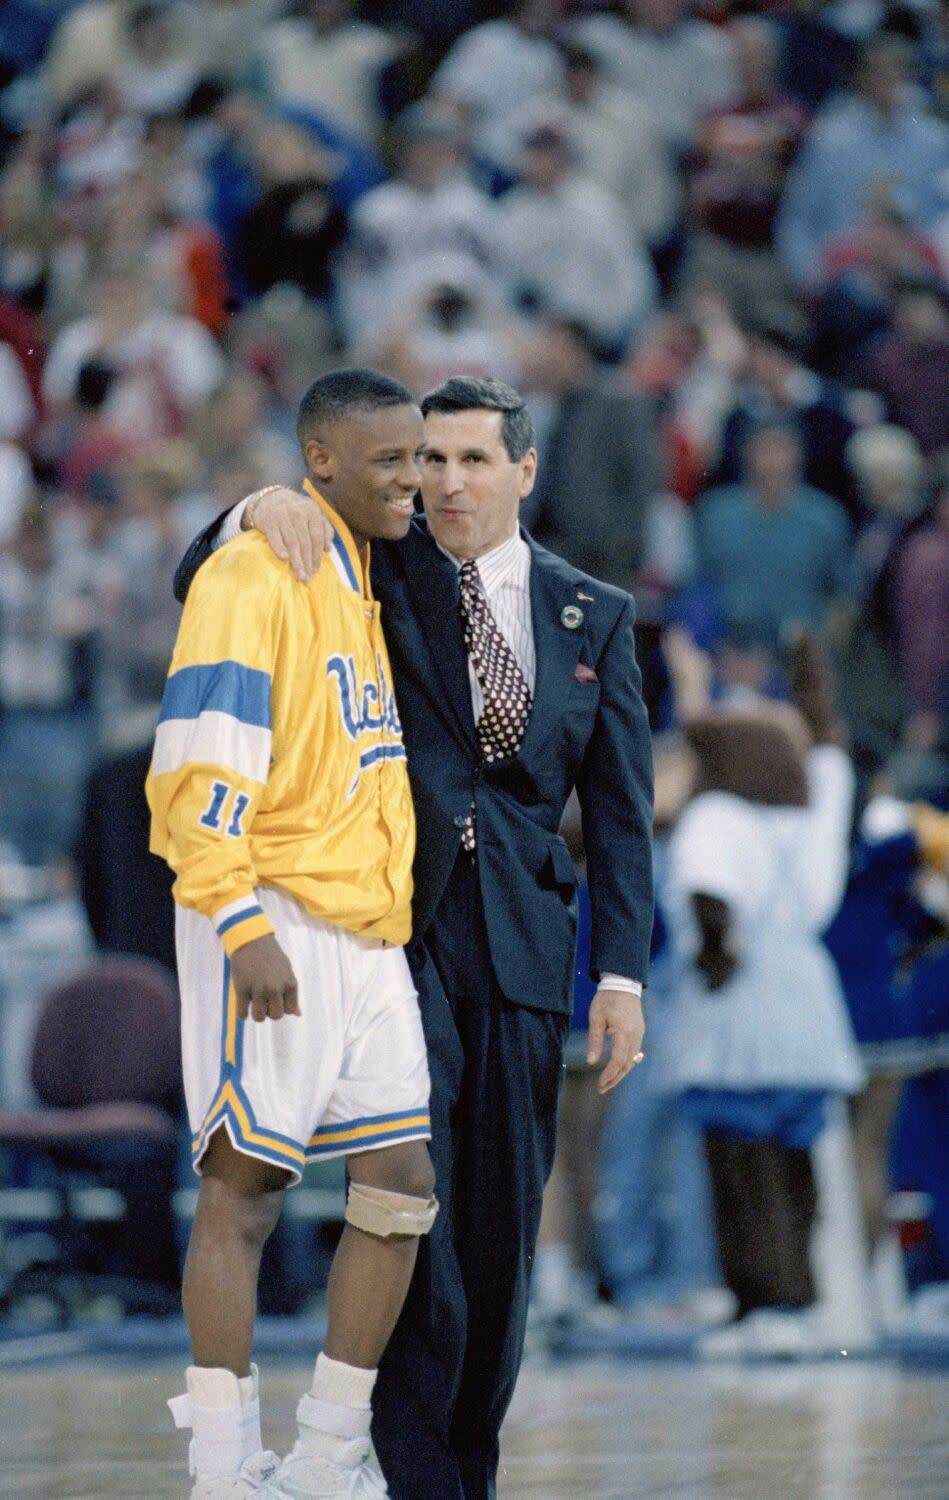 UCLA coach Jim Harrick congratulates Tyus Edney after the Bruins defeated Oklahoma State in the Final Four in 1995.